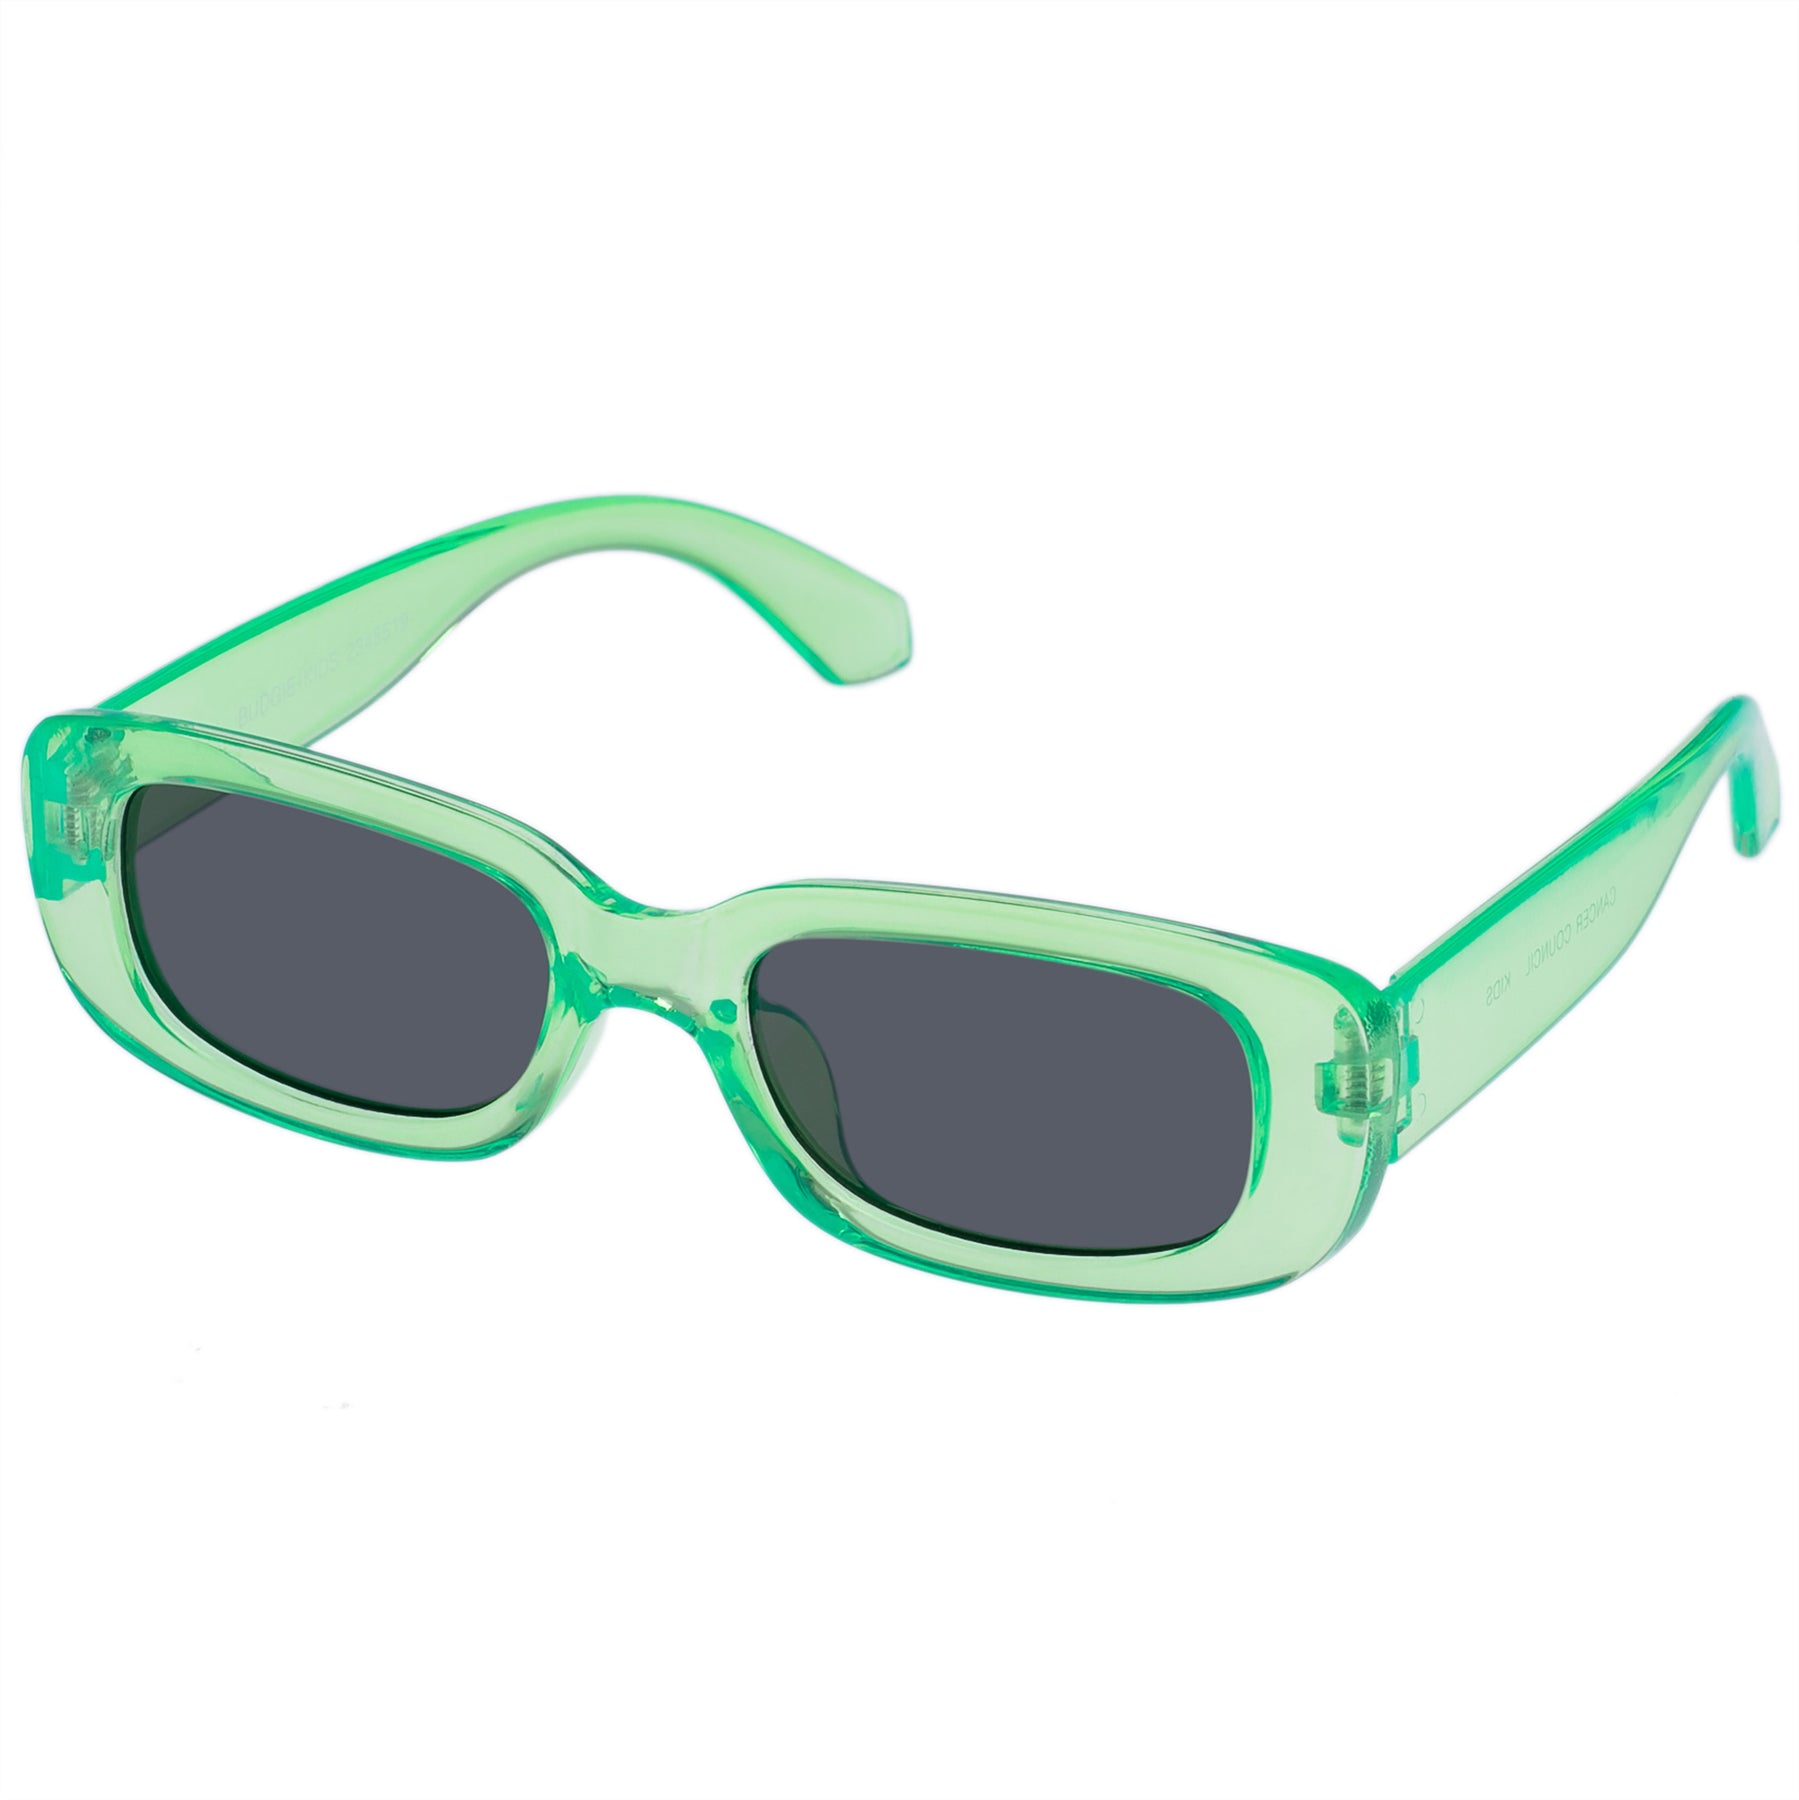 Budgie Sunglasses - Neon Green – Cancer Council Shop